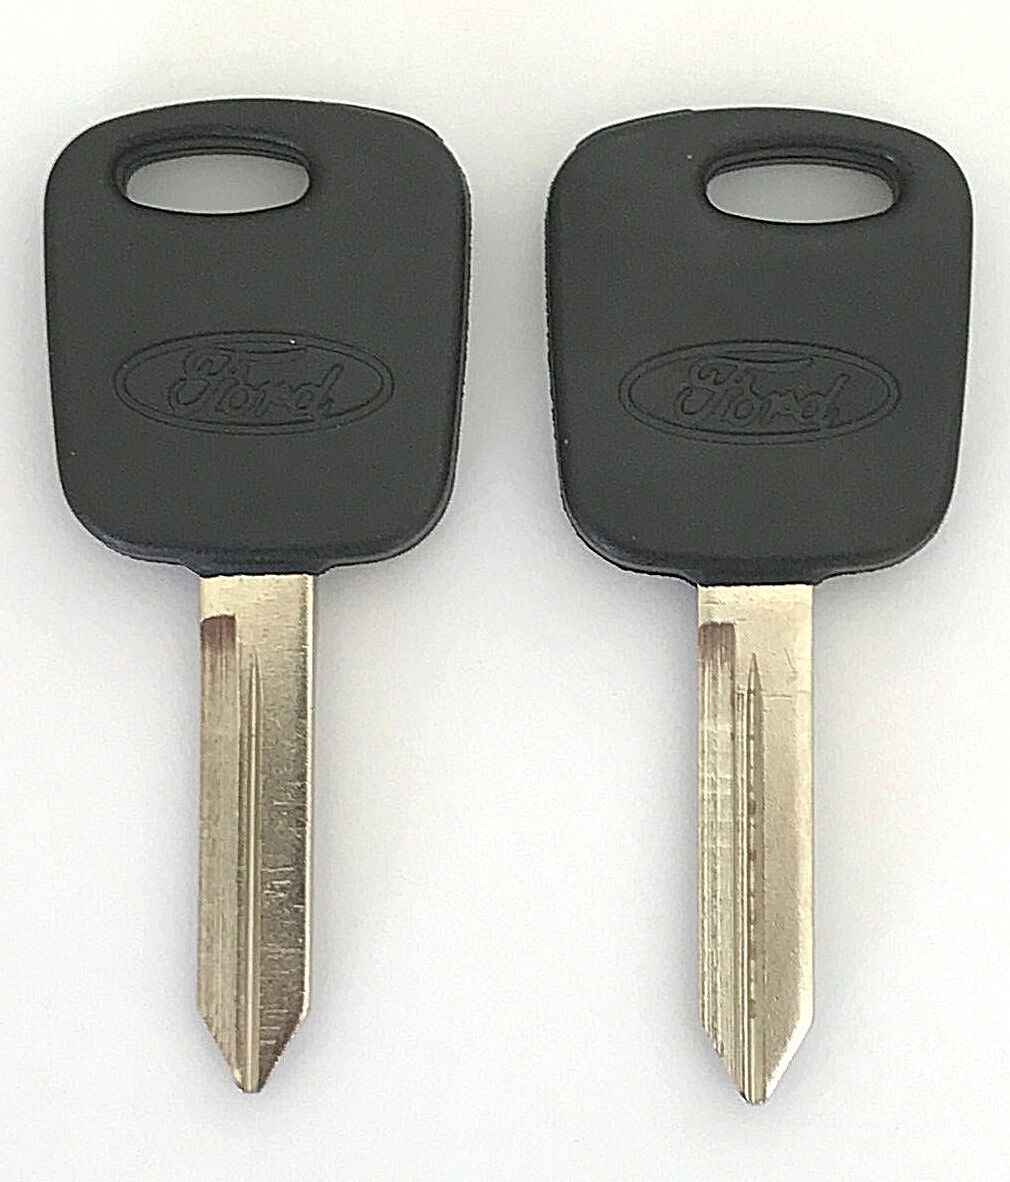 2Pcs Ford H72 Transponder Key Blank TEX 4C chip with FORD LOGO USA Seller 